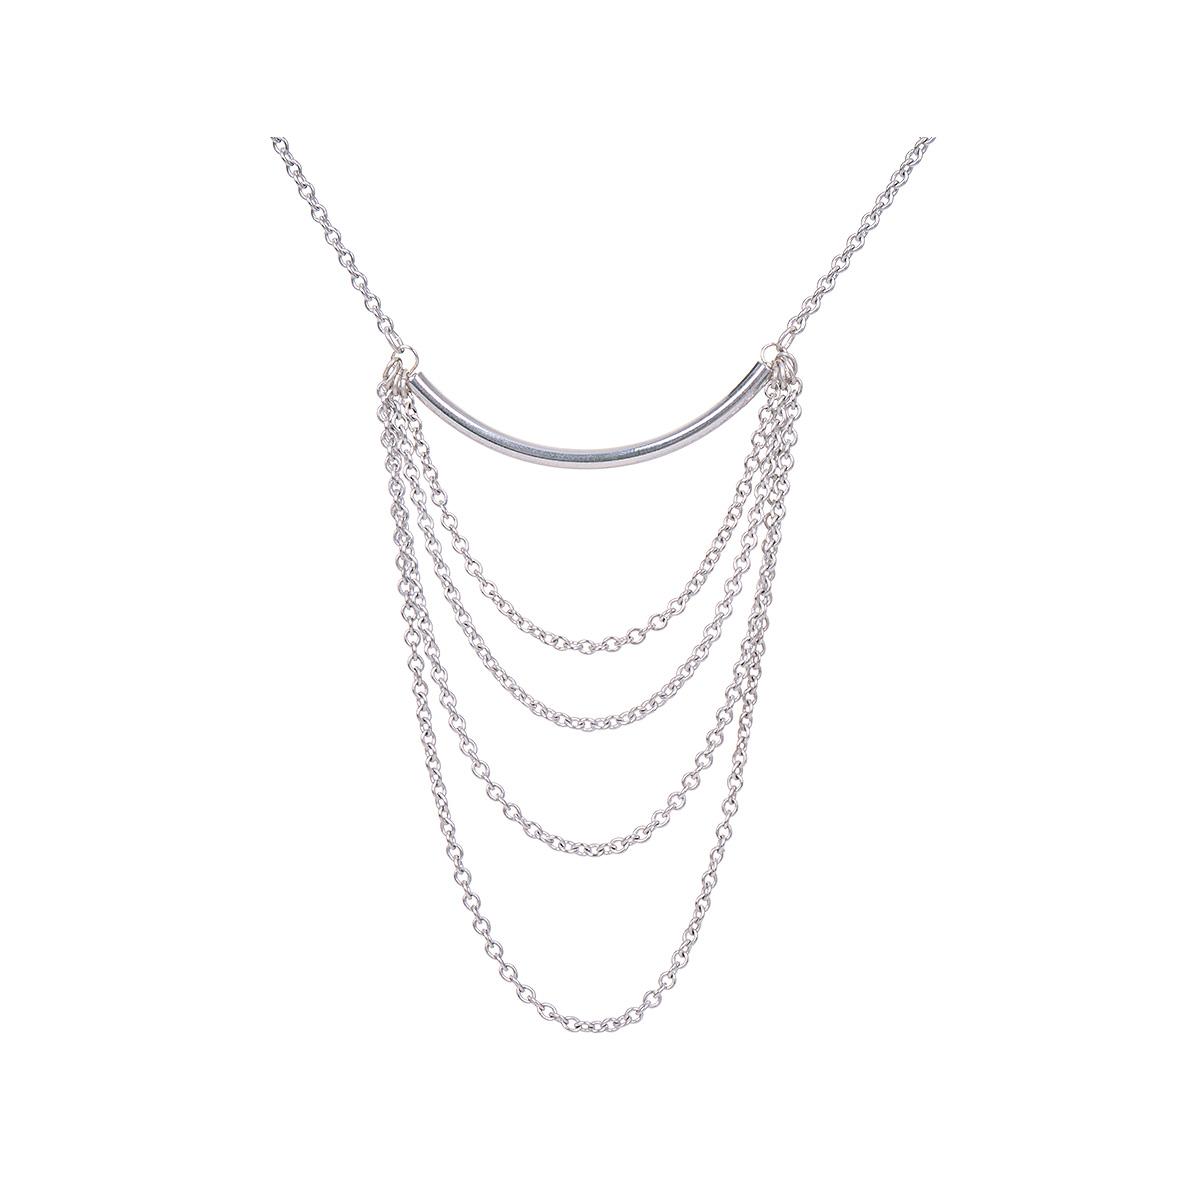  Women's Metal Bar With Chain Loops Necklace